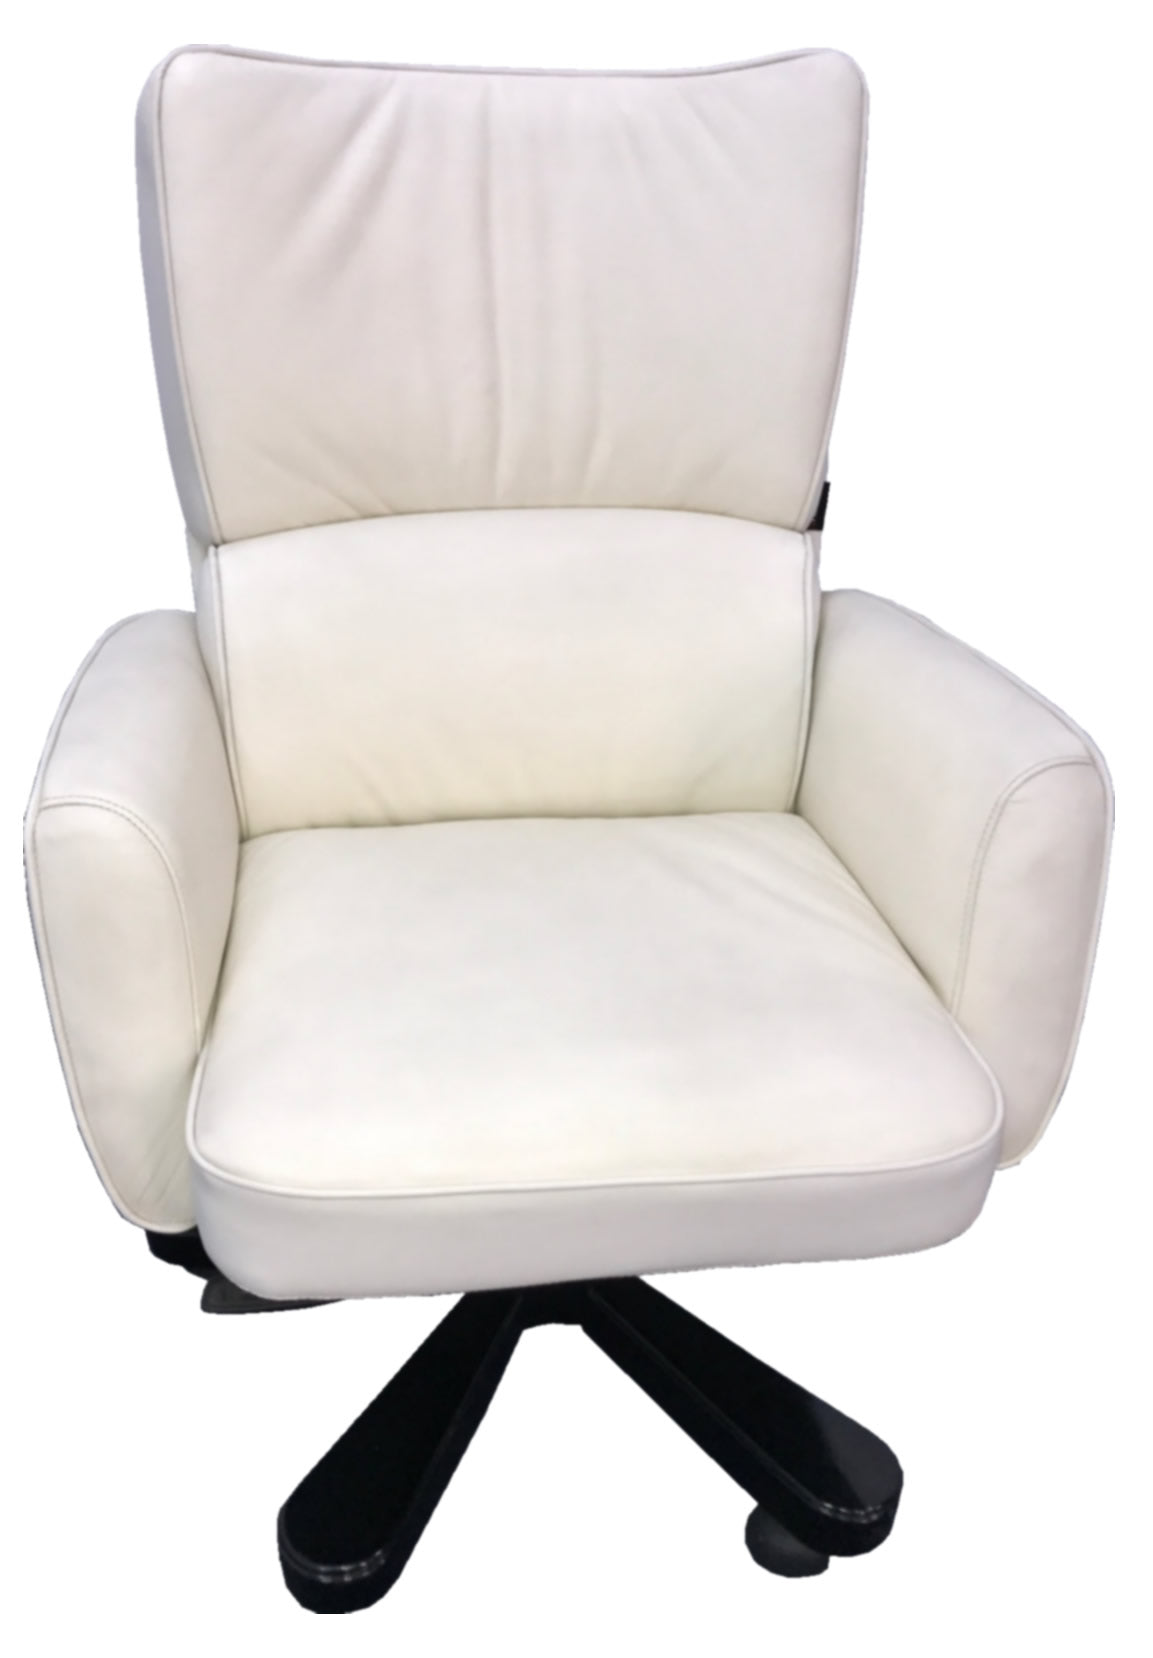 Executive Office Chair Genuine White Leather - DES-B011-W